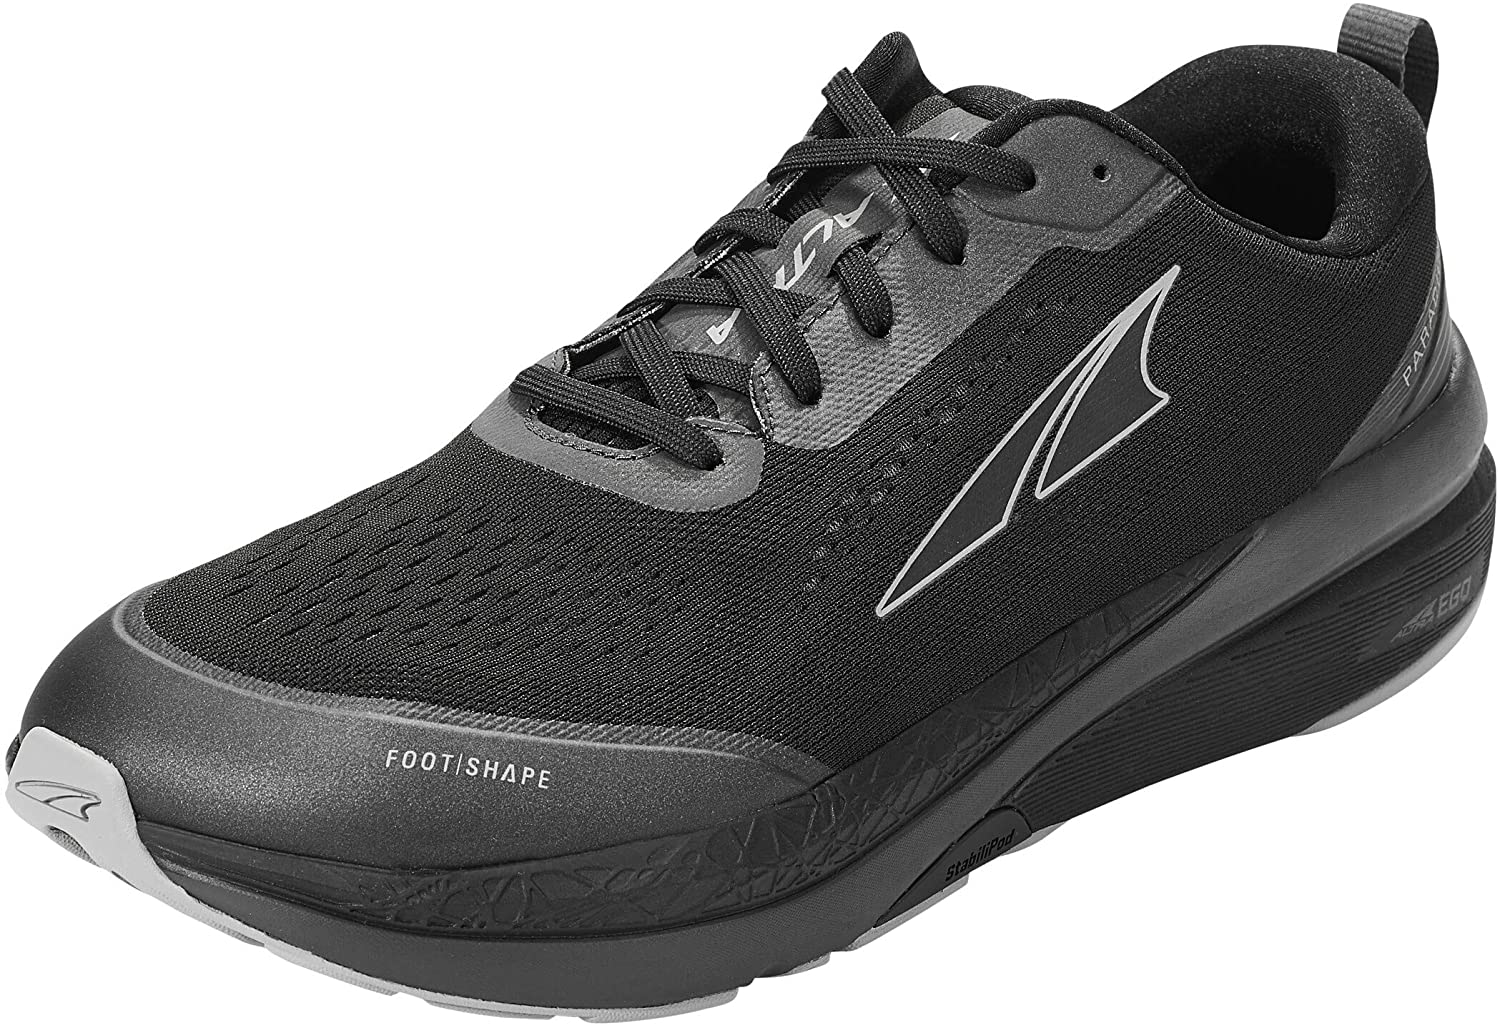 Altra Men's Paradigm 5 Road Running Shoe in Black from the side